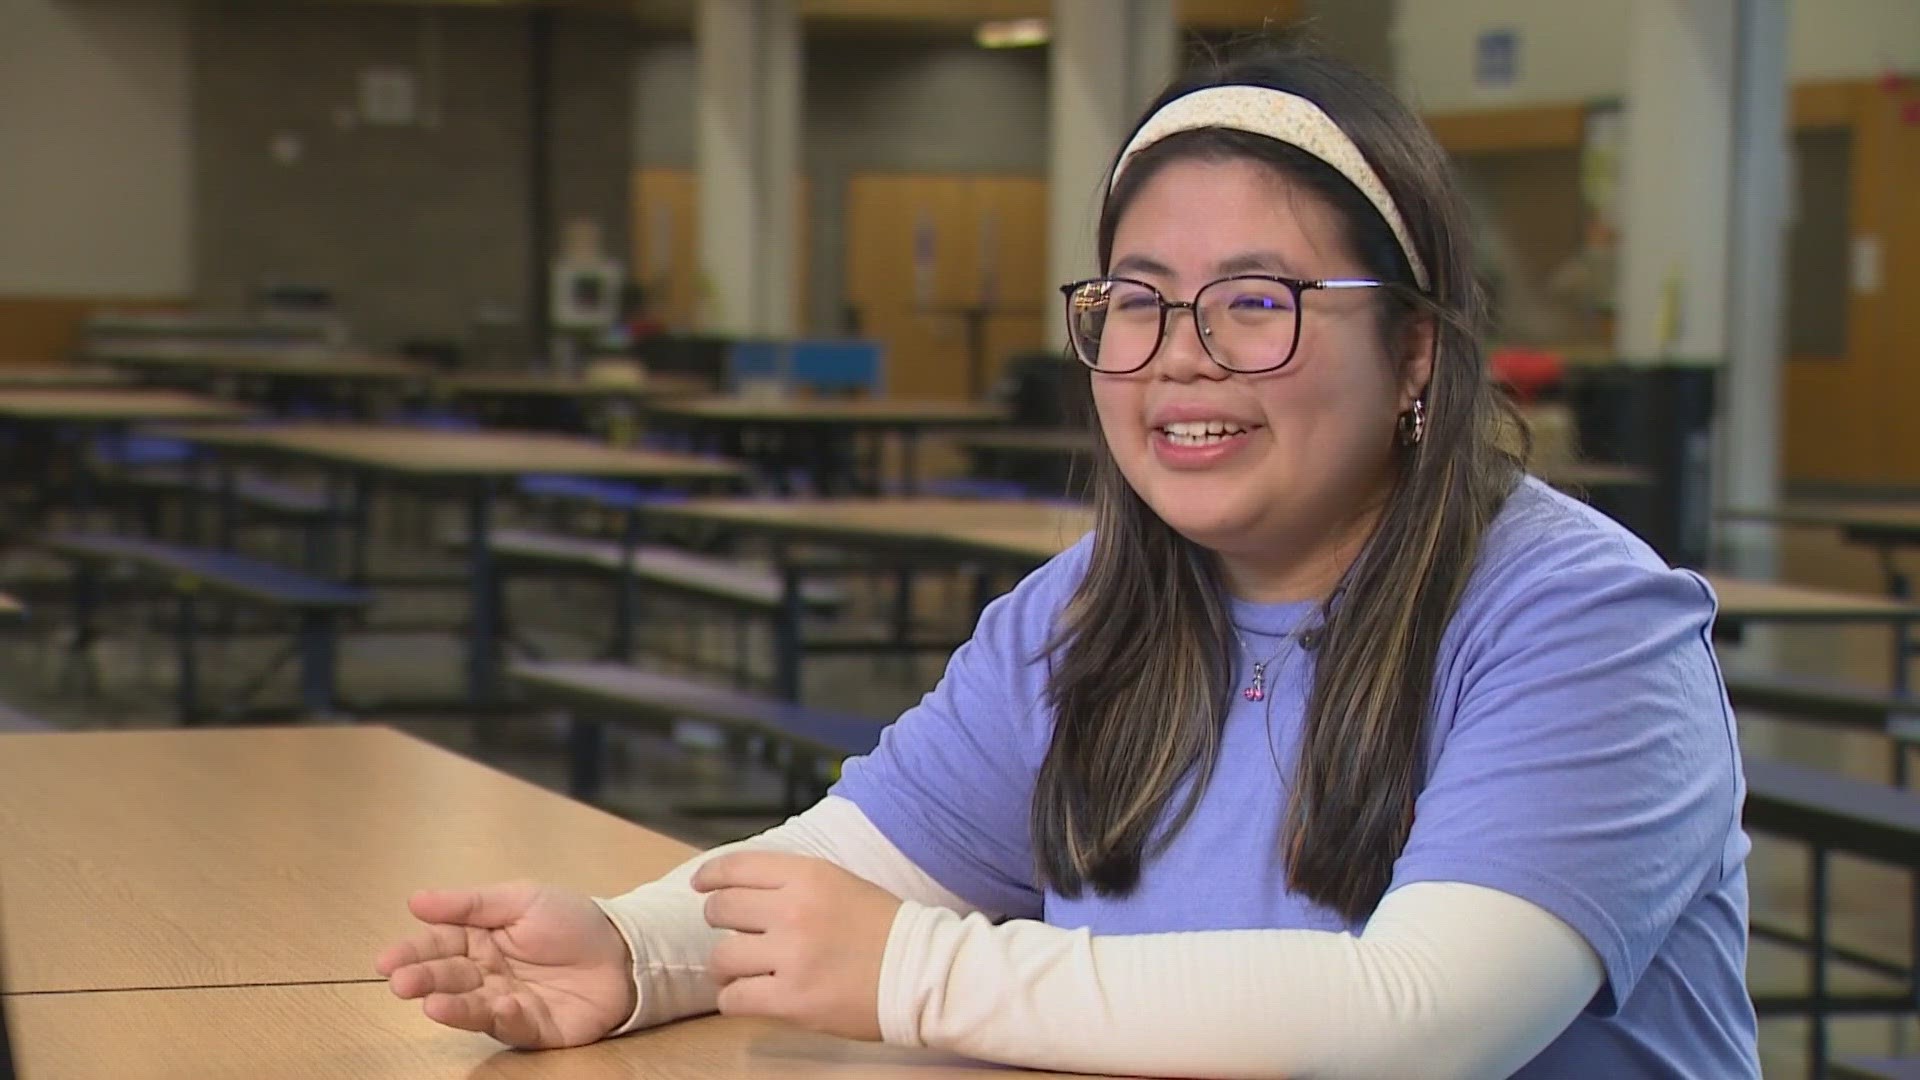 The high school student encourages other young people and her peers to de-stigmatize efforts to maintain mental health.